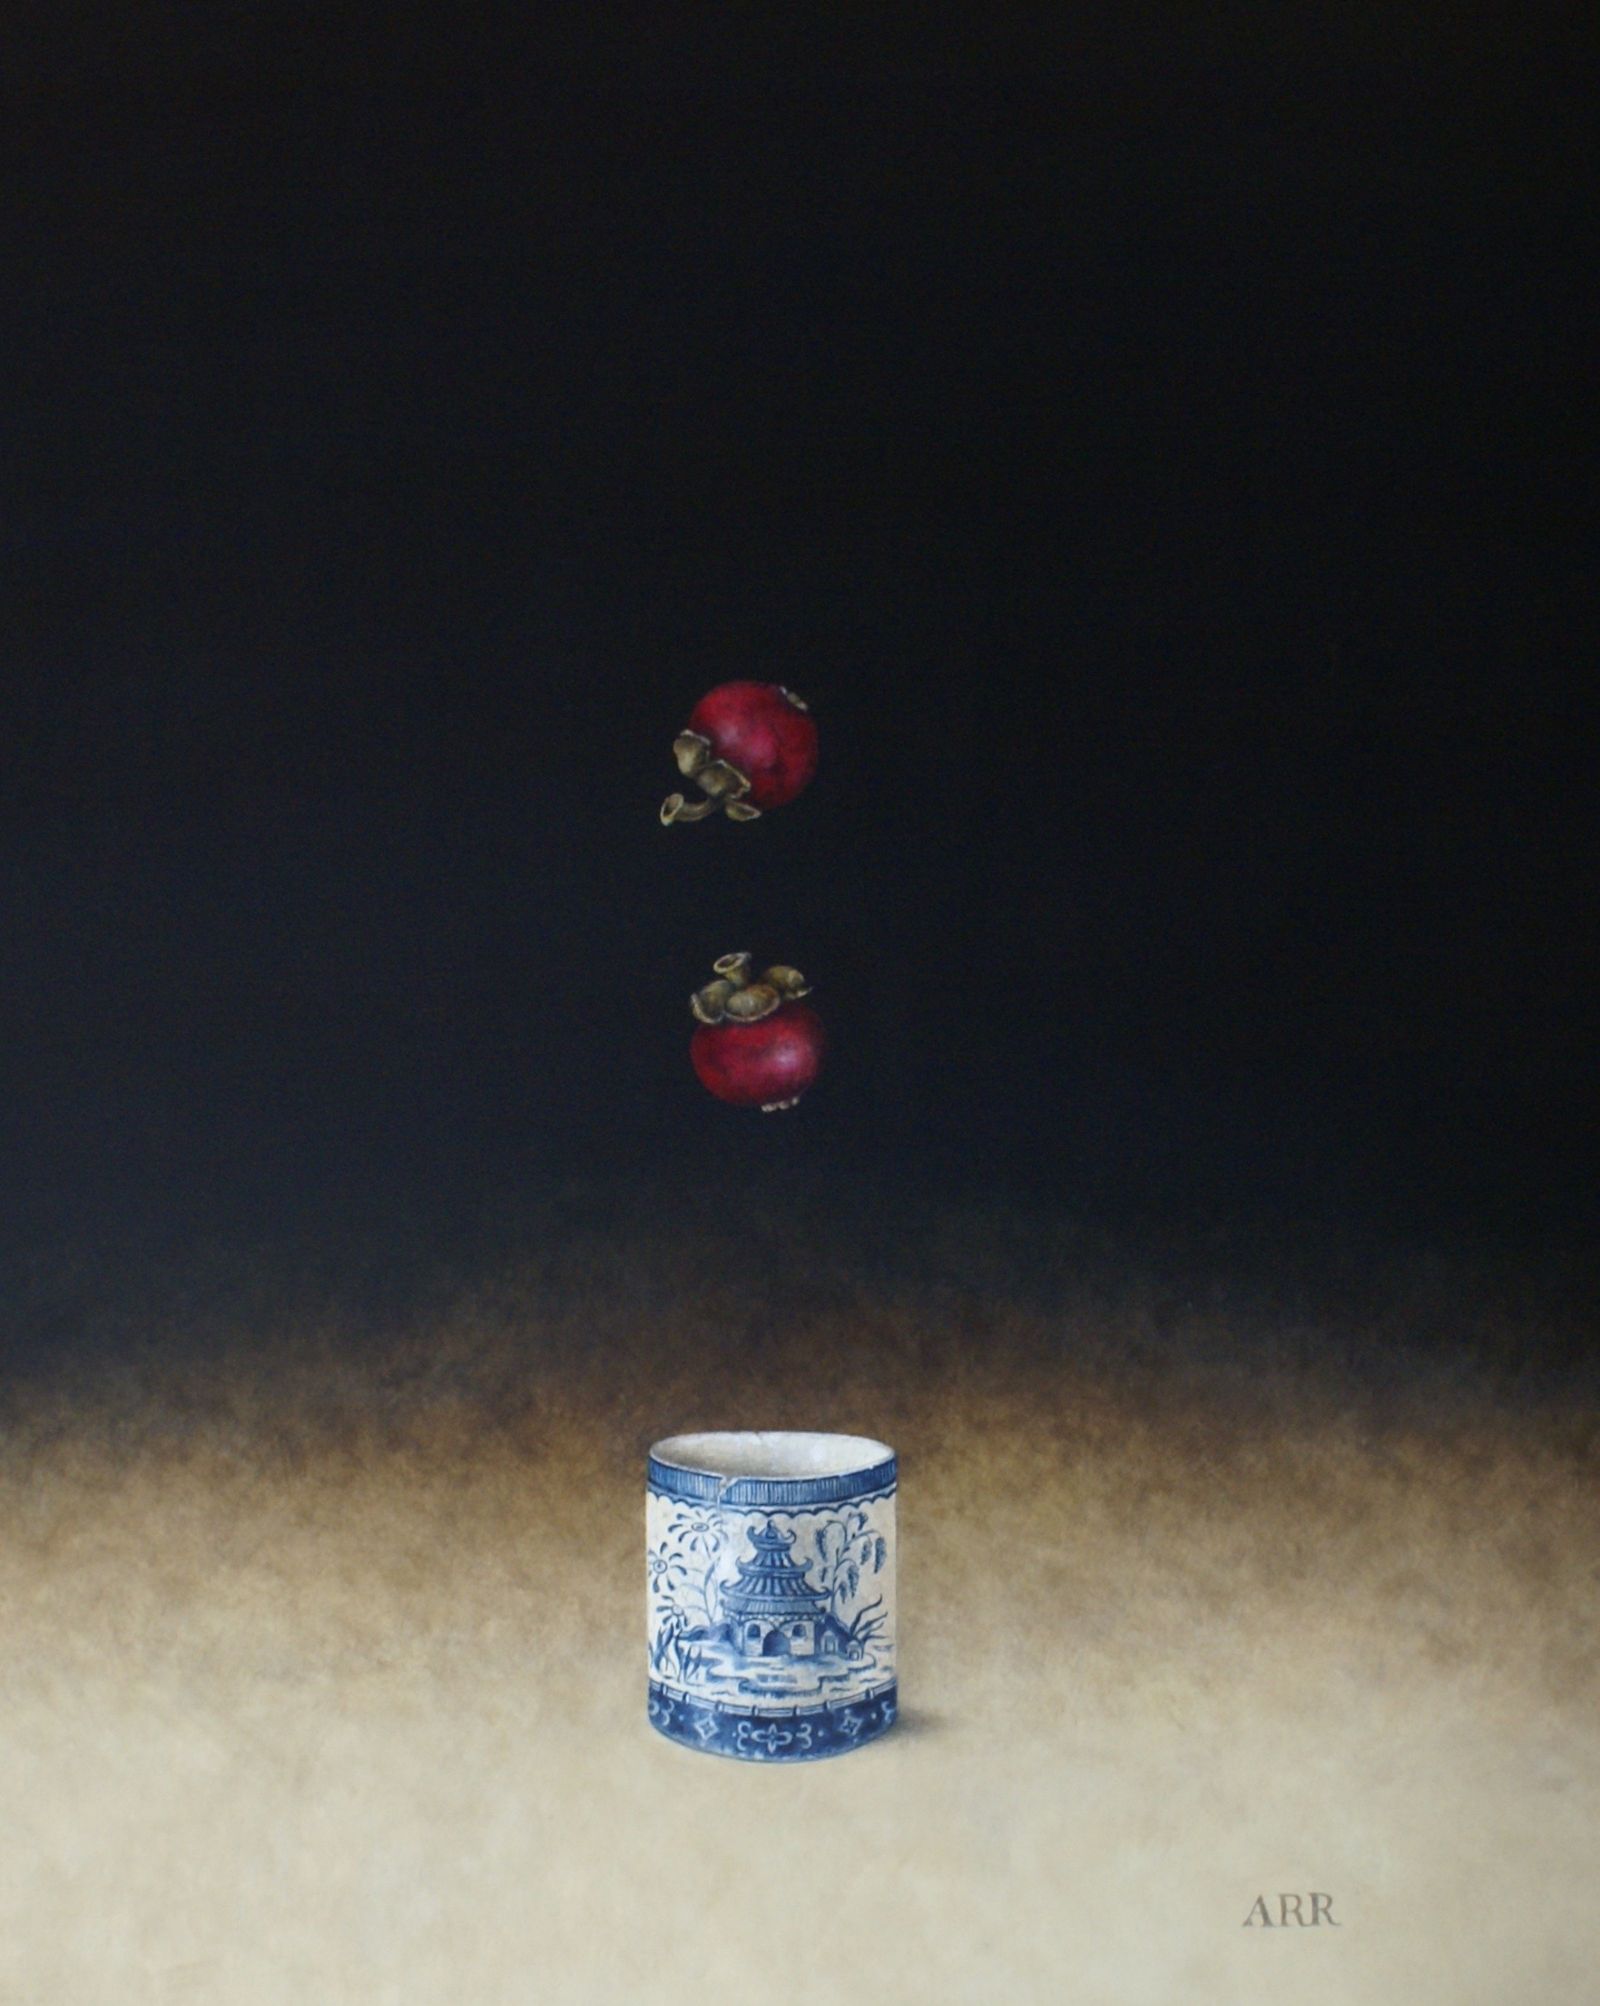 Cracked Jar with Falling Mangosteens by Alison Rankin